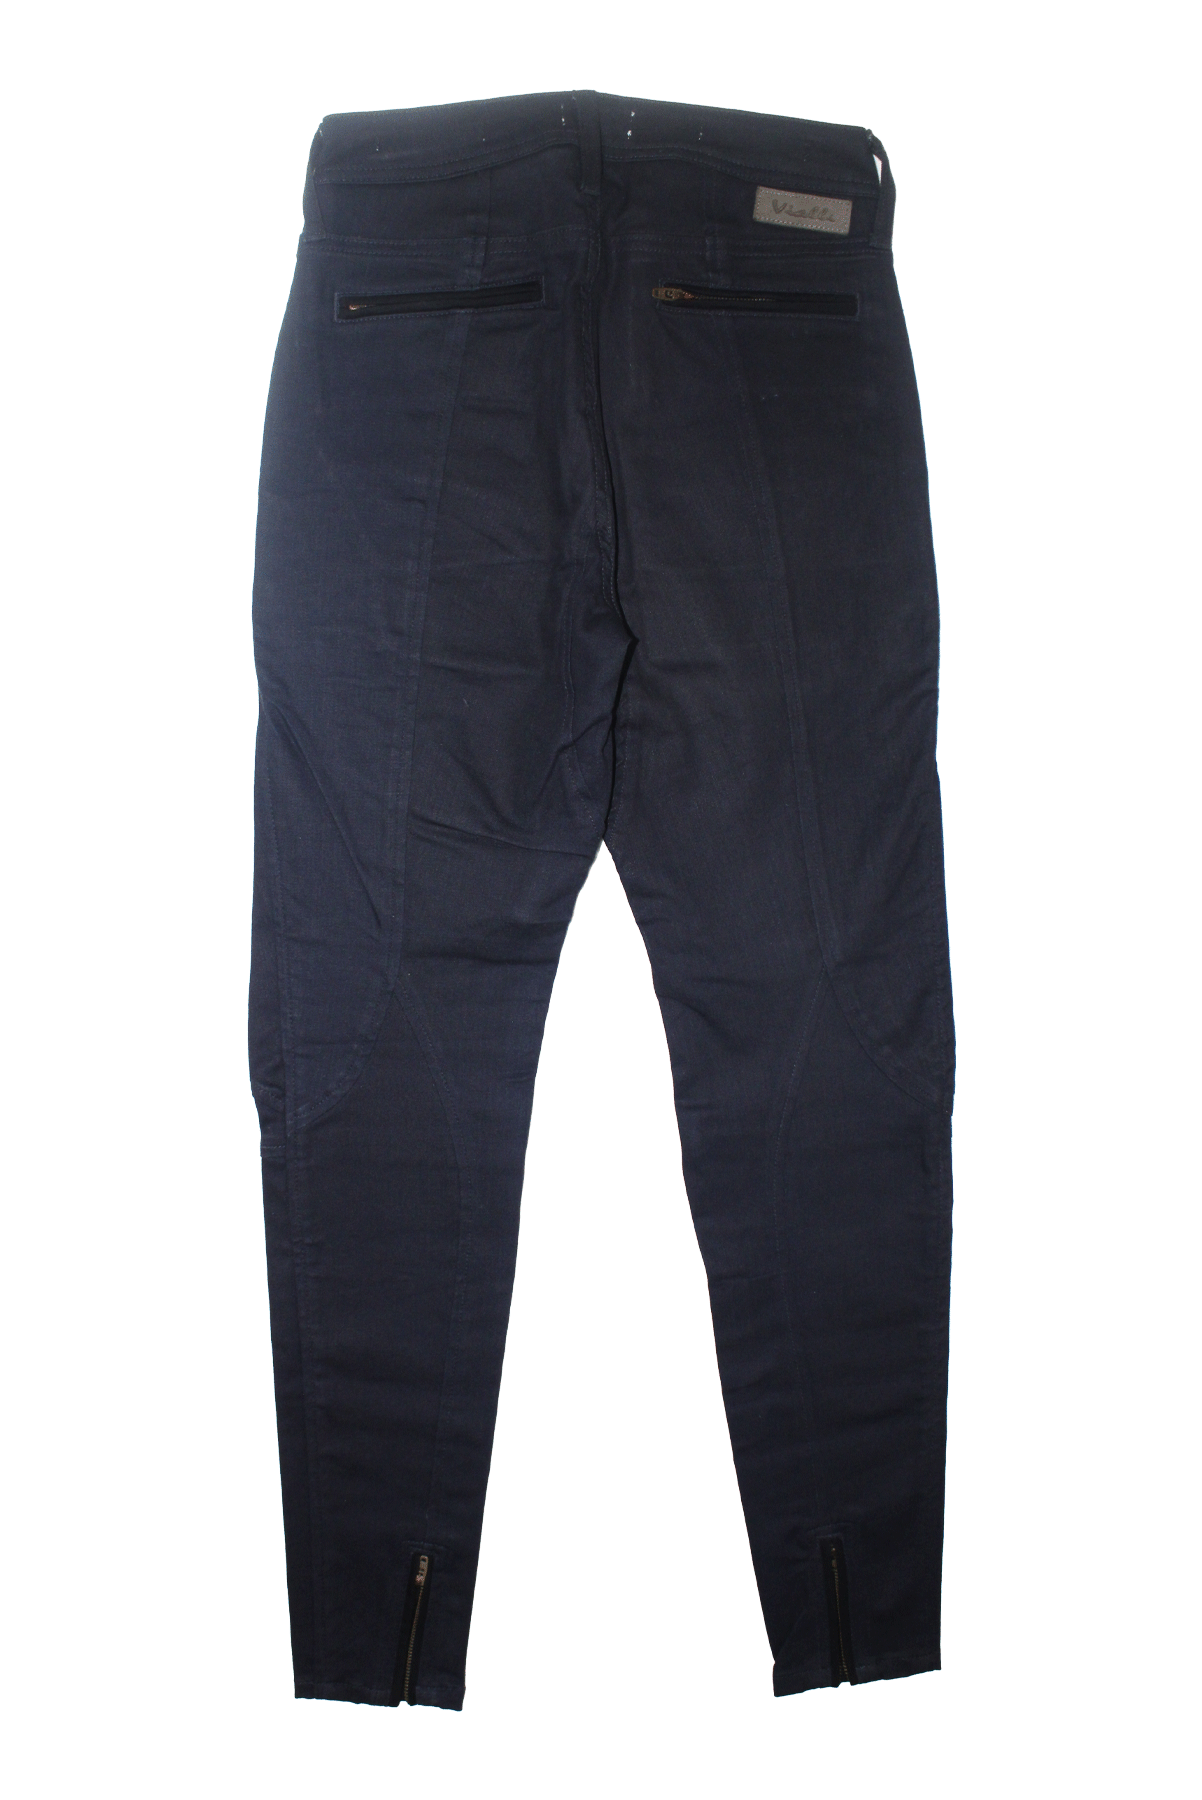 Vialli Ink Coated Ultra Fit Jeans